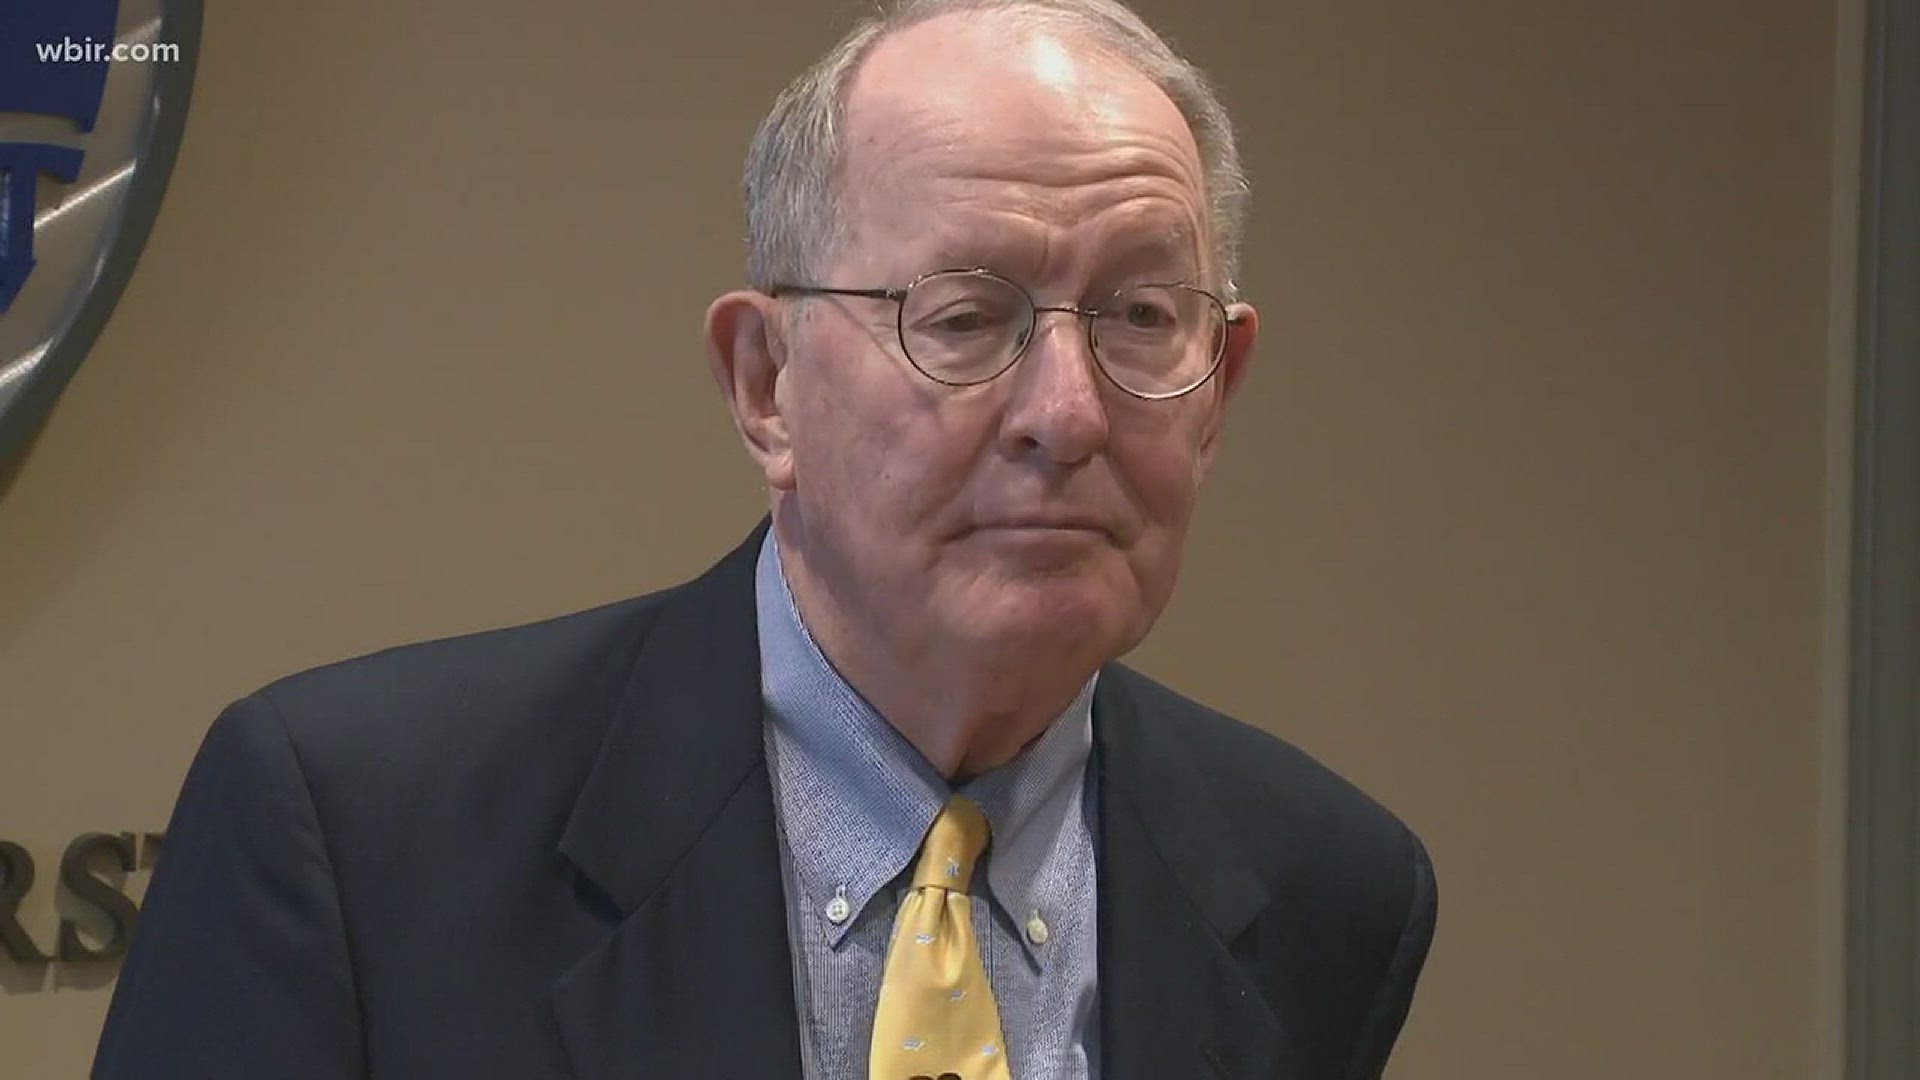 Feb. 23, 2018: Sen. Lamar Alexander says he plans to introduce in the next few weeks a bill that would fix the maintenance backlog in the National Park Service.